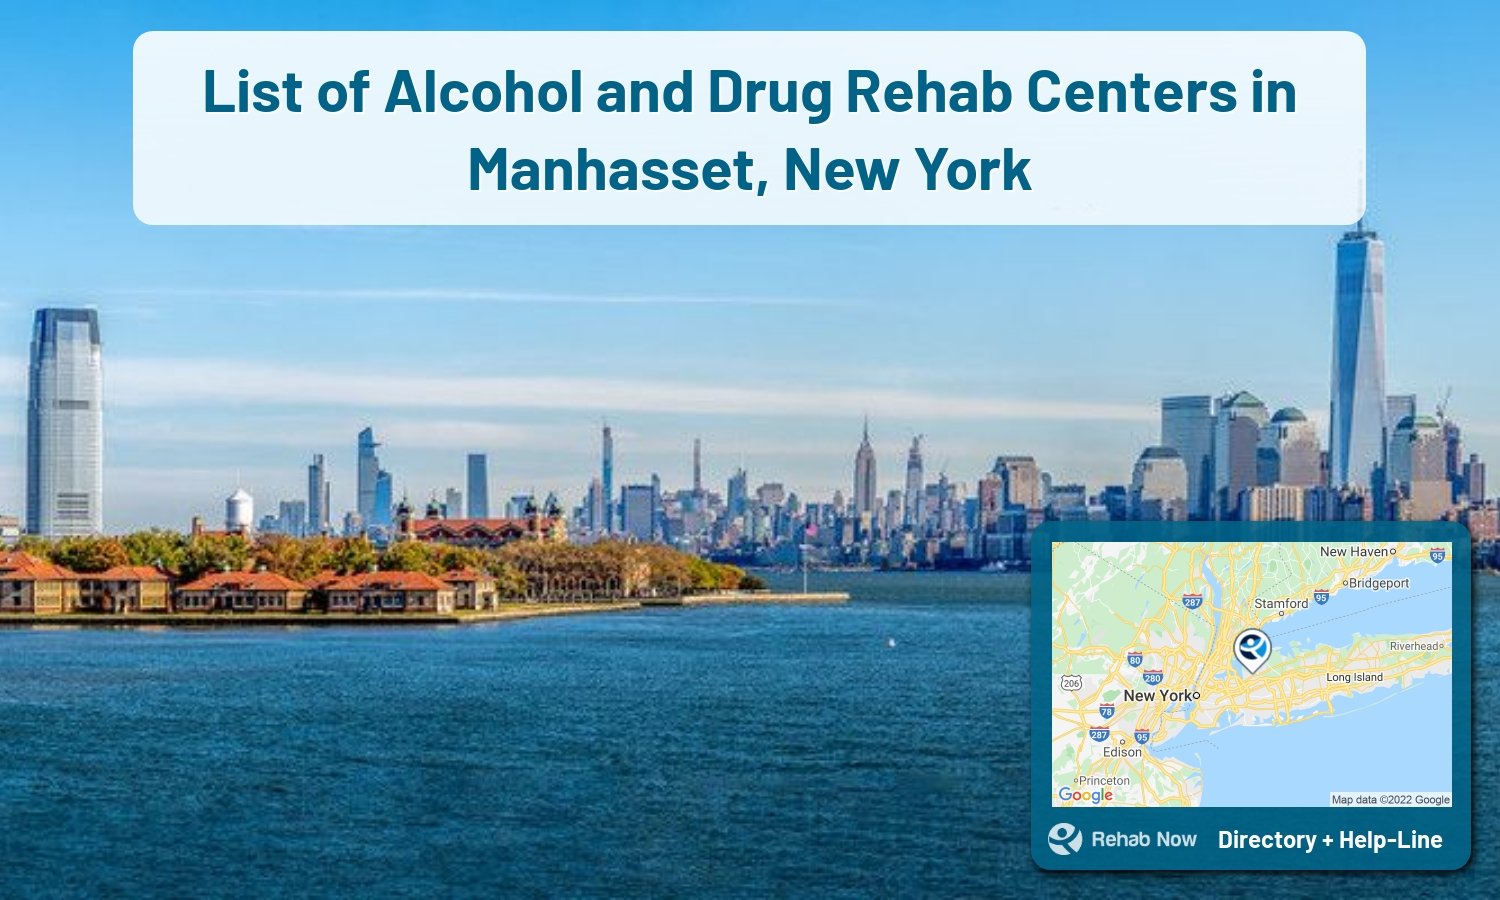 Let our expert counselors help find the best addiction treatment in Manhasset, New York now with a free call to our hotline.